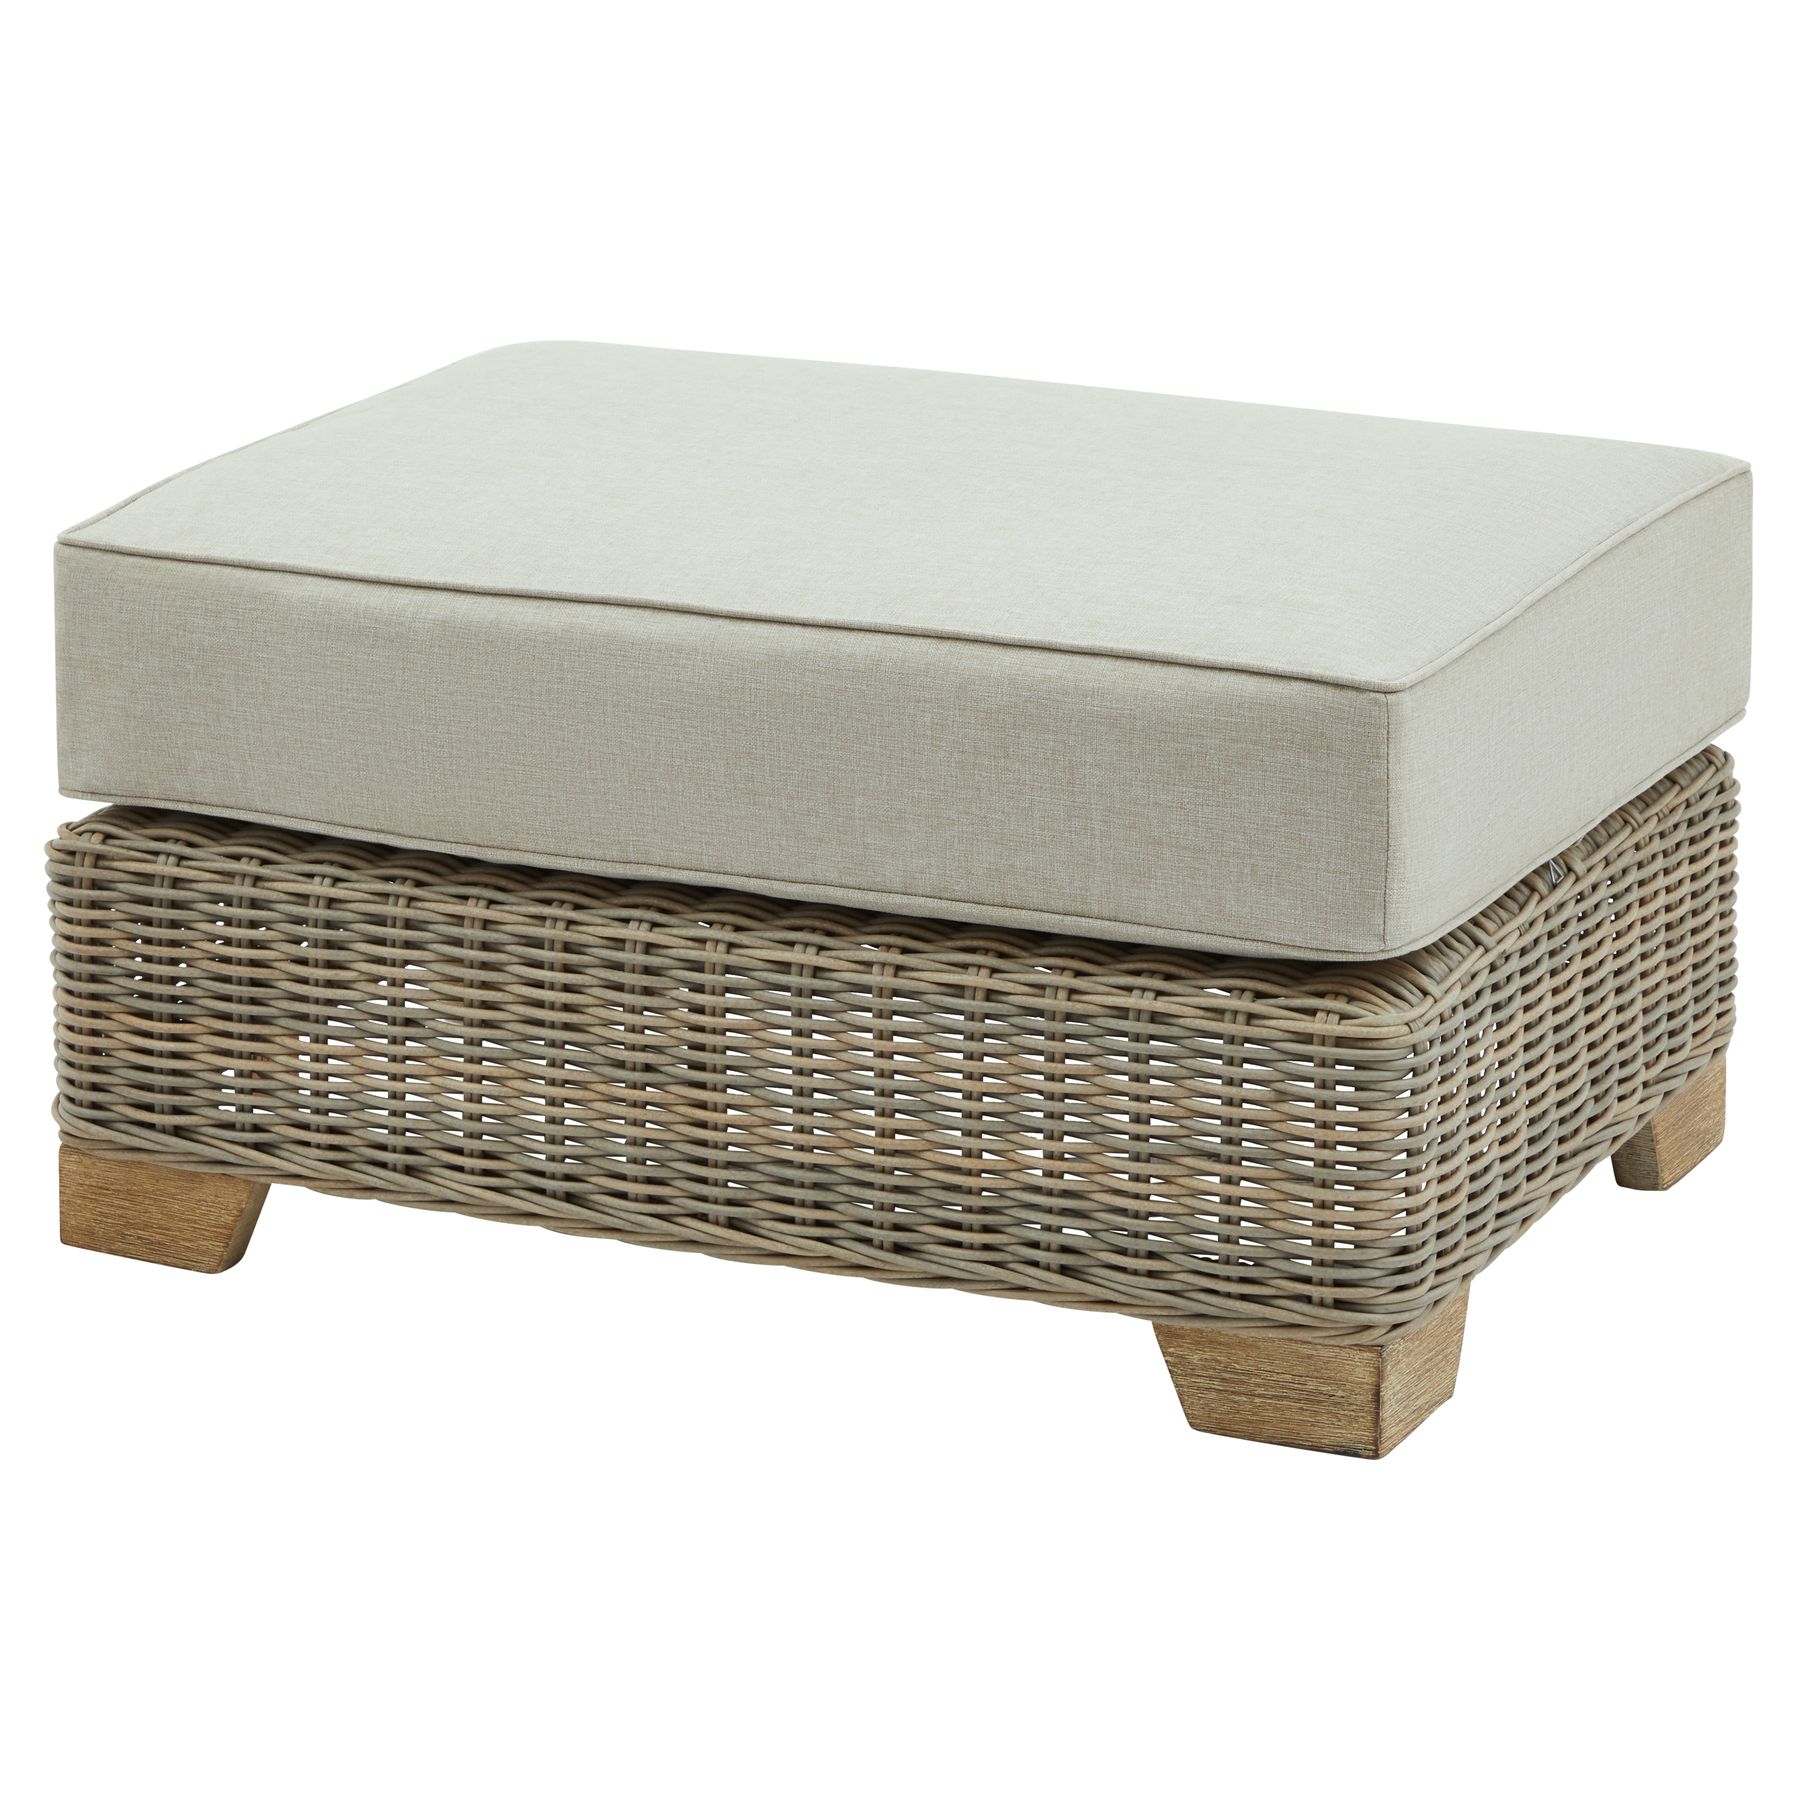 Capri Collection Outdoor Footstool - Image 1